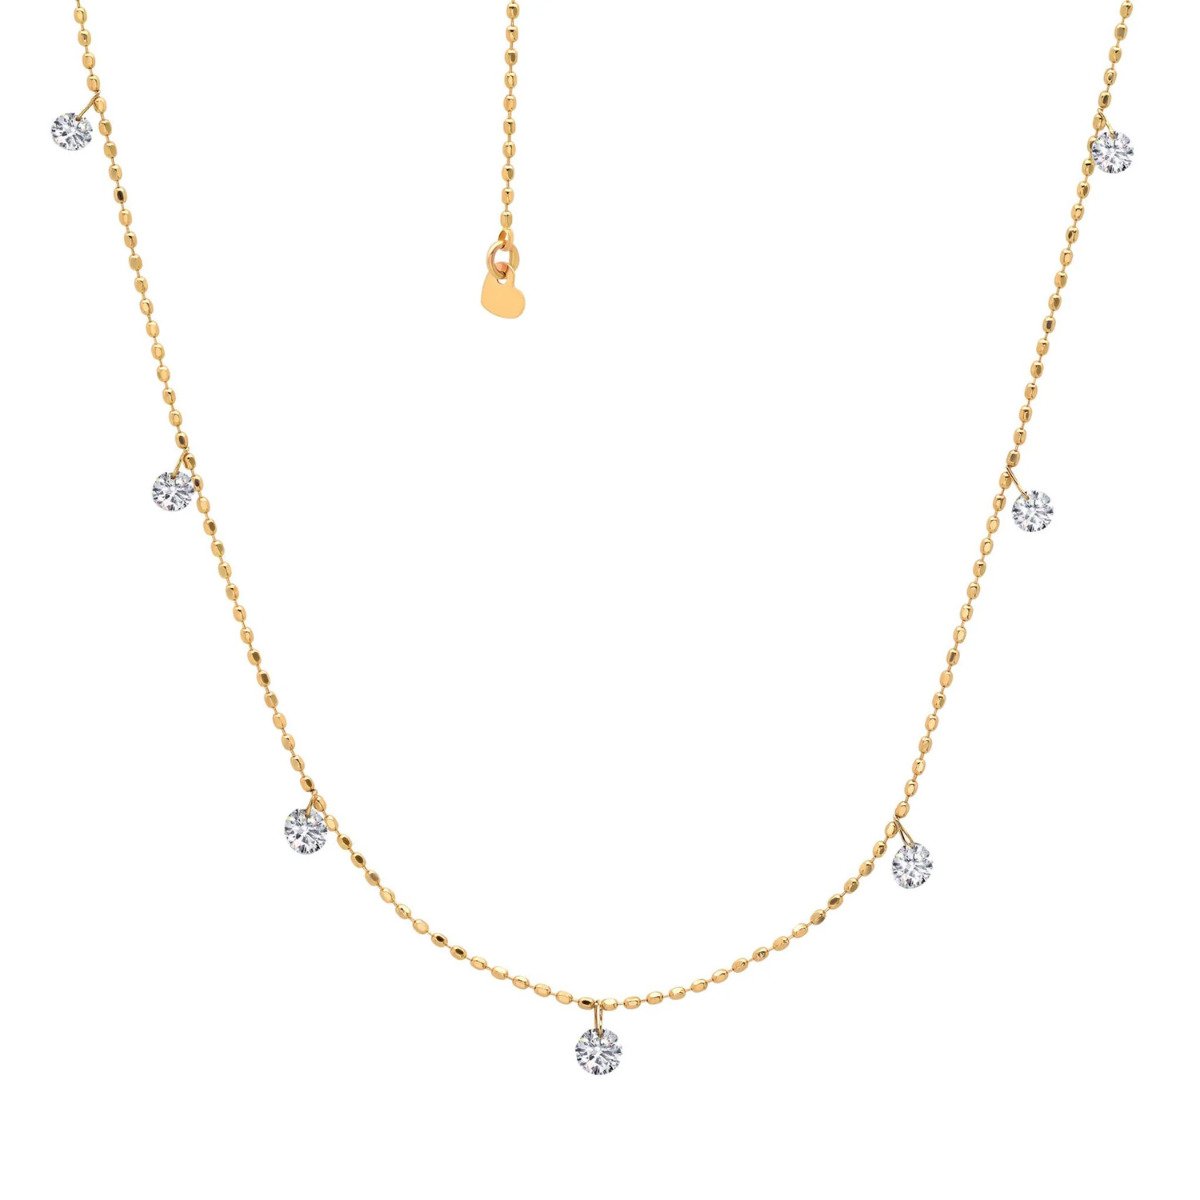 Graziela Gems Floating Diamond Tiny Necklace in 18kt Yellow Gold